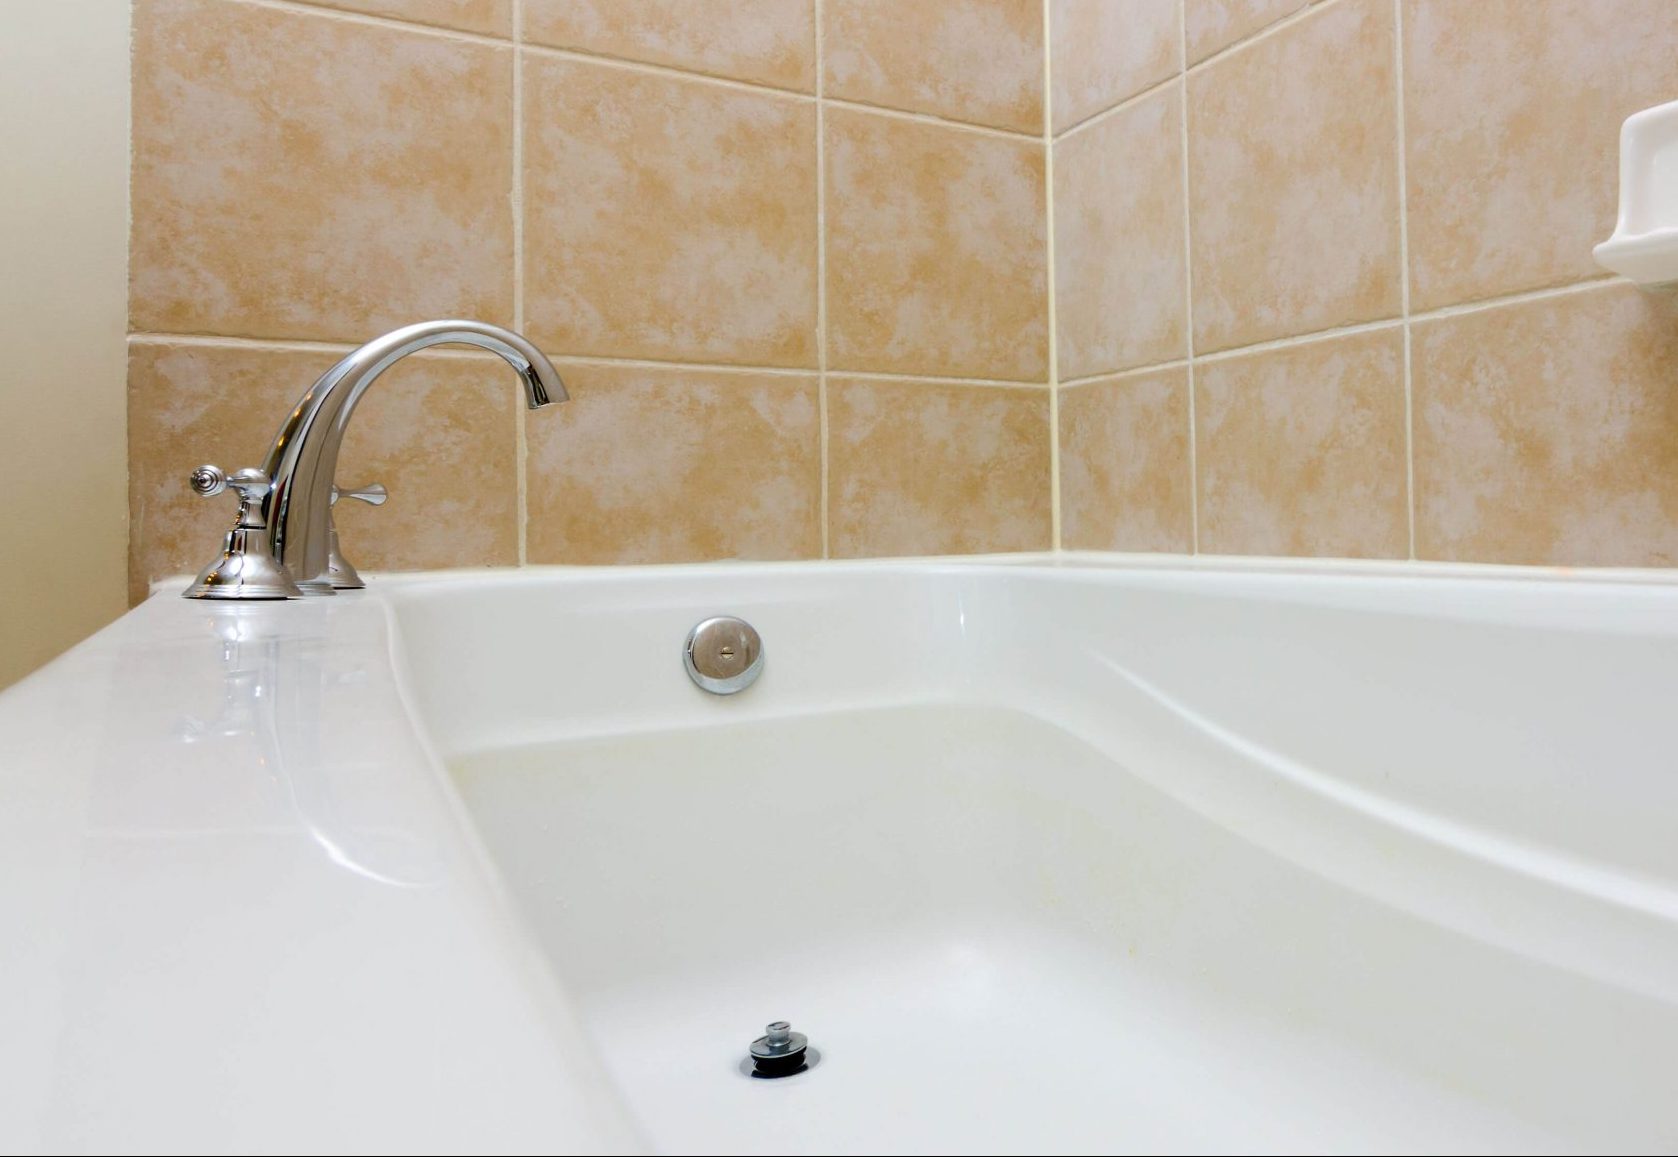 how to block a bathtub drain without a plug